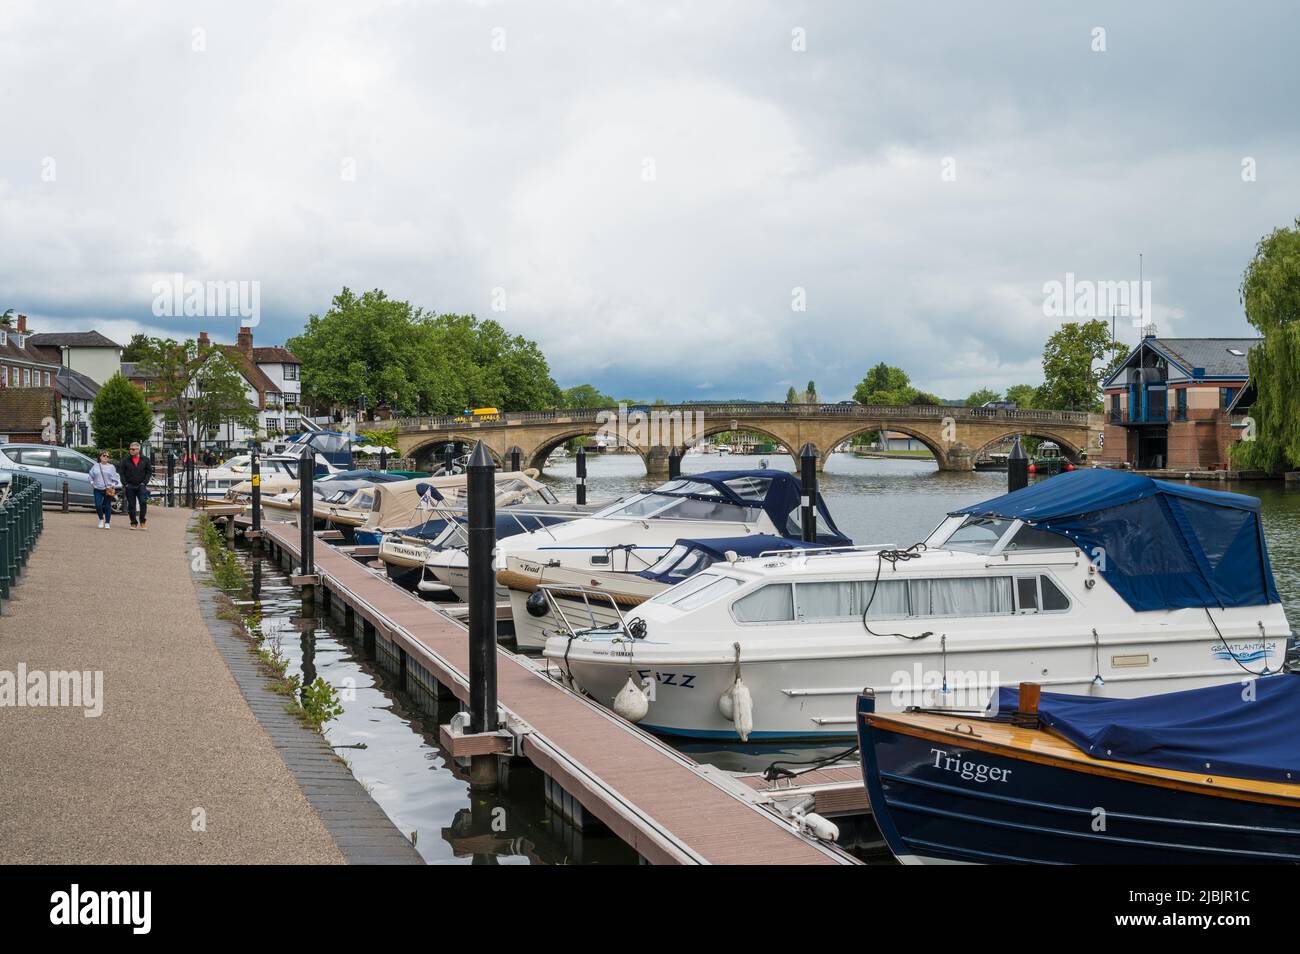 View along the river Thames towards Henley Bridge from Thameside footpath. Small leisure craft moored alongside the path. Henley on Thames, England. Stock Photo